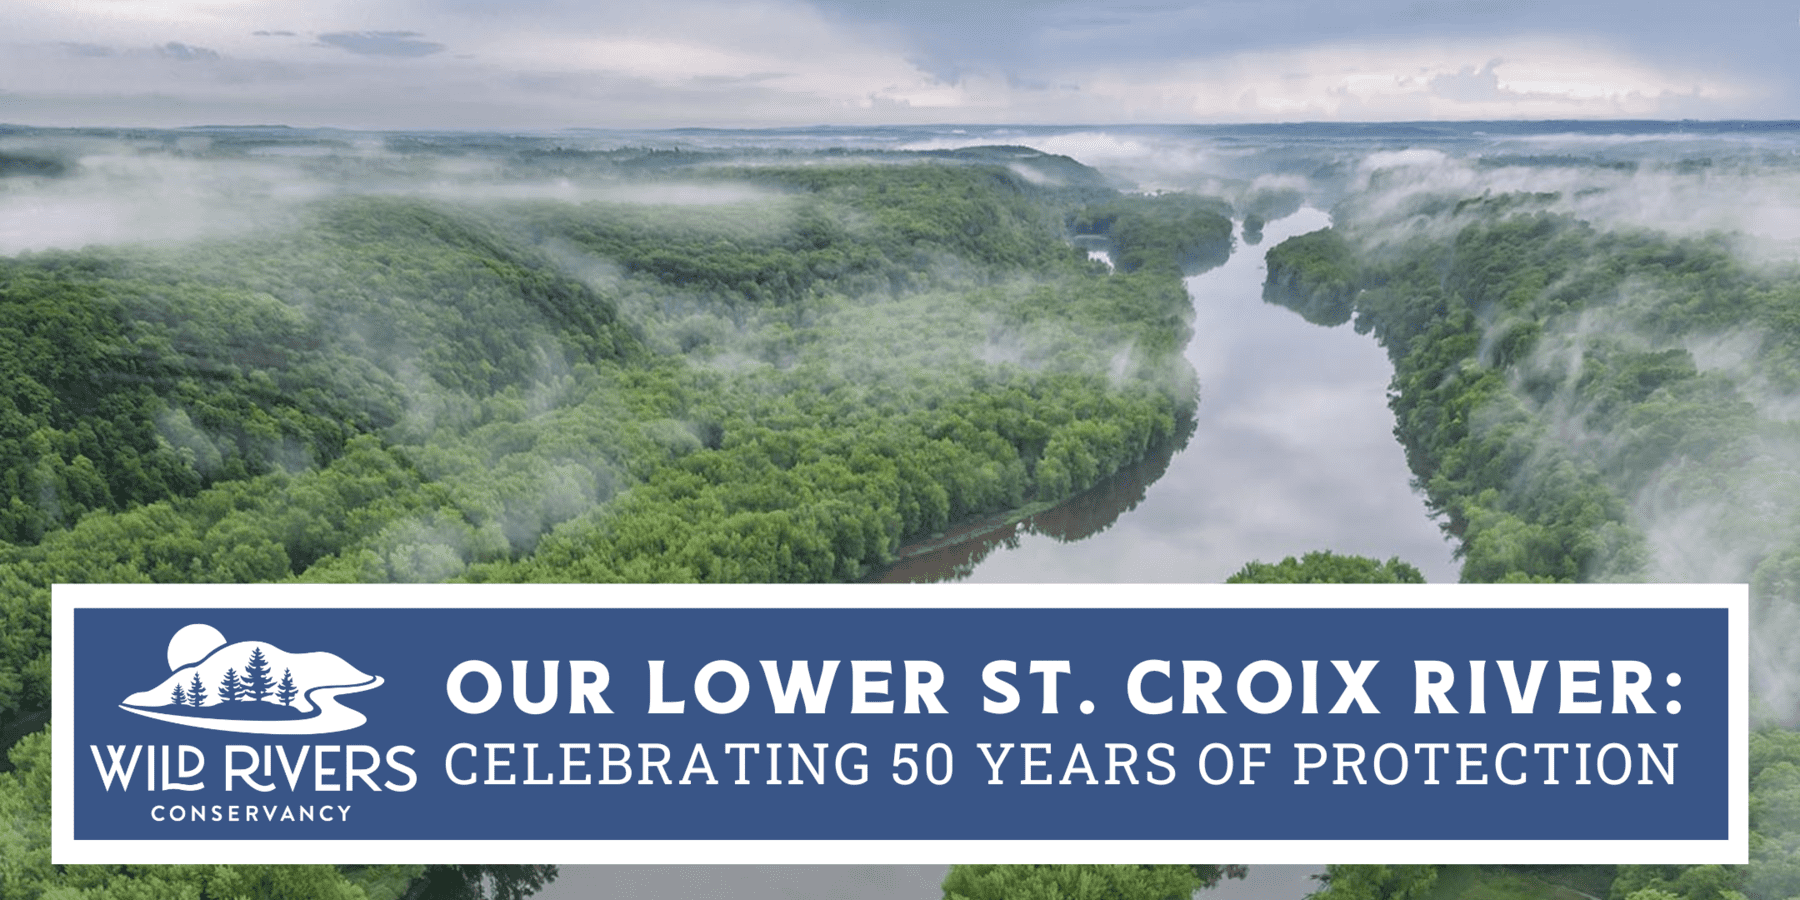 Our Lower St. Croix River